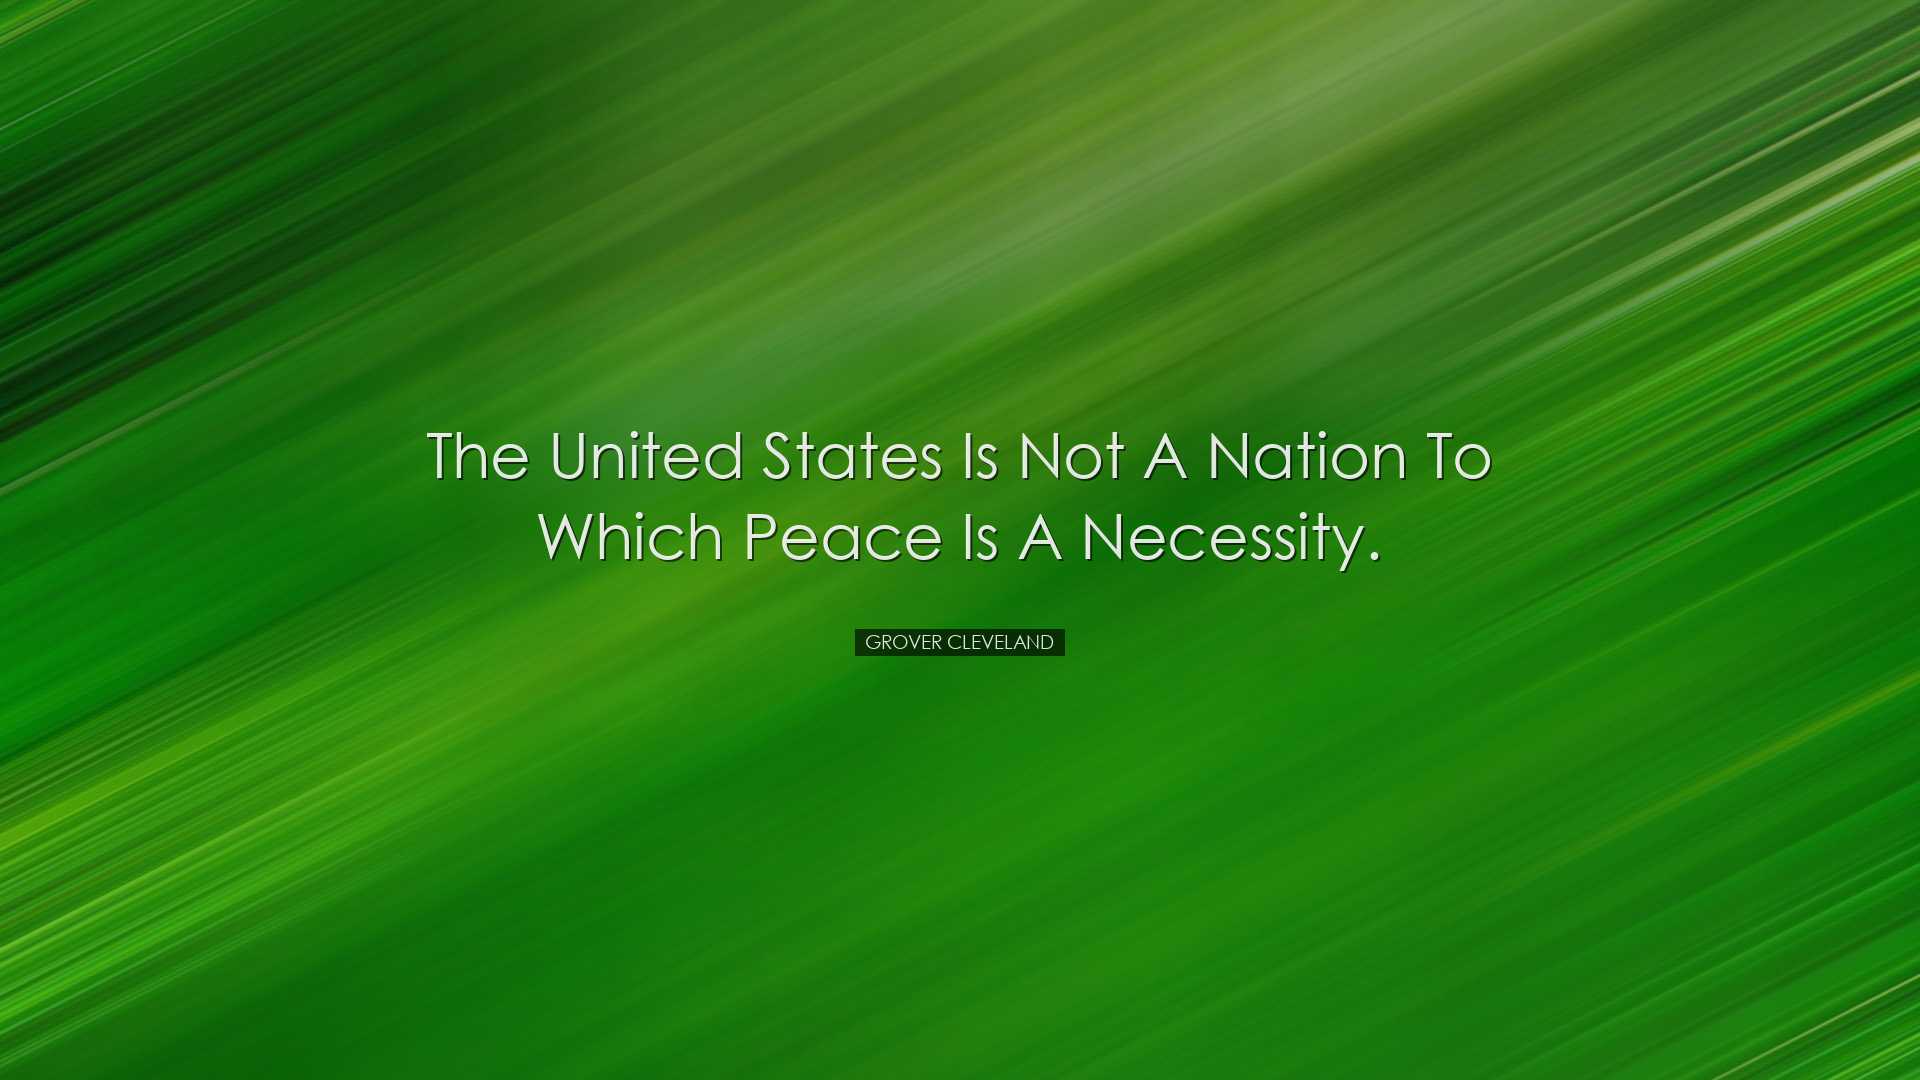 The United States is not a nation to which peace is a necessity. -